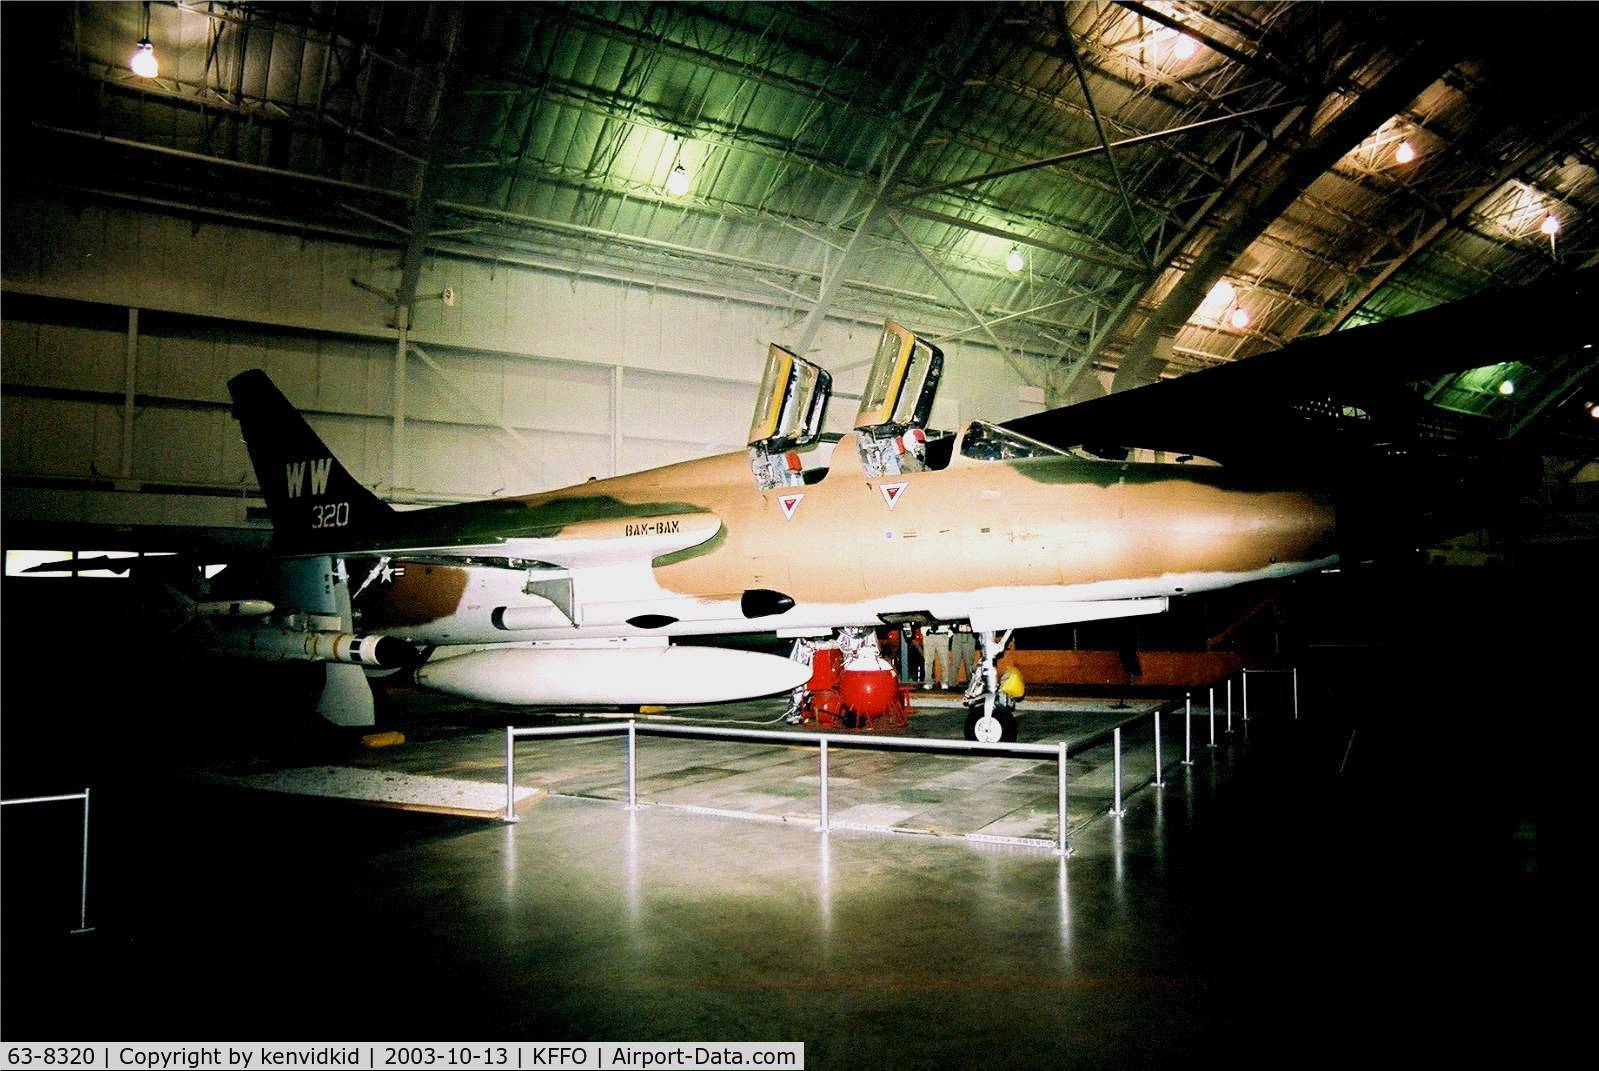 63-8320, 1963 Republic F-105G-1-RE Thunderchief C/N F097, At the Museum of the United States Air Force Dayton Ohio.